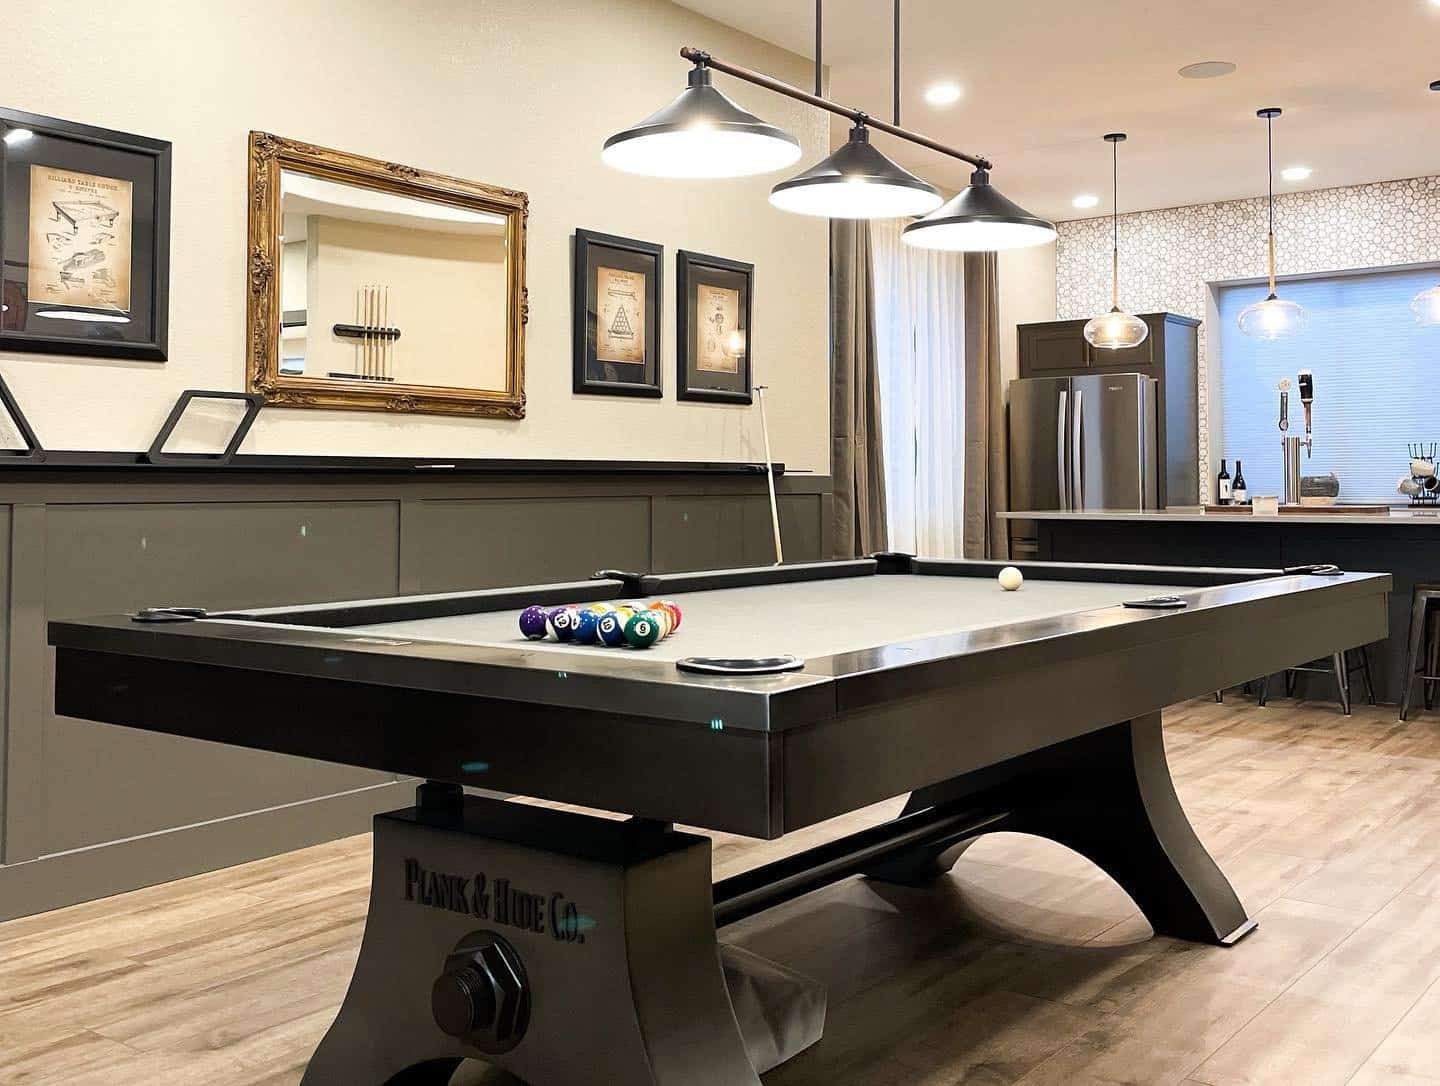 Pool table with wet bar